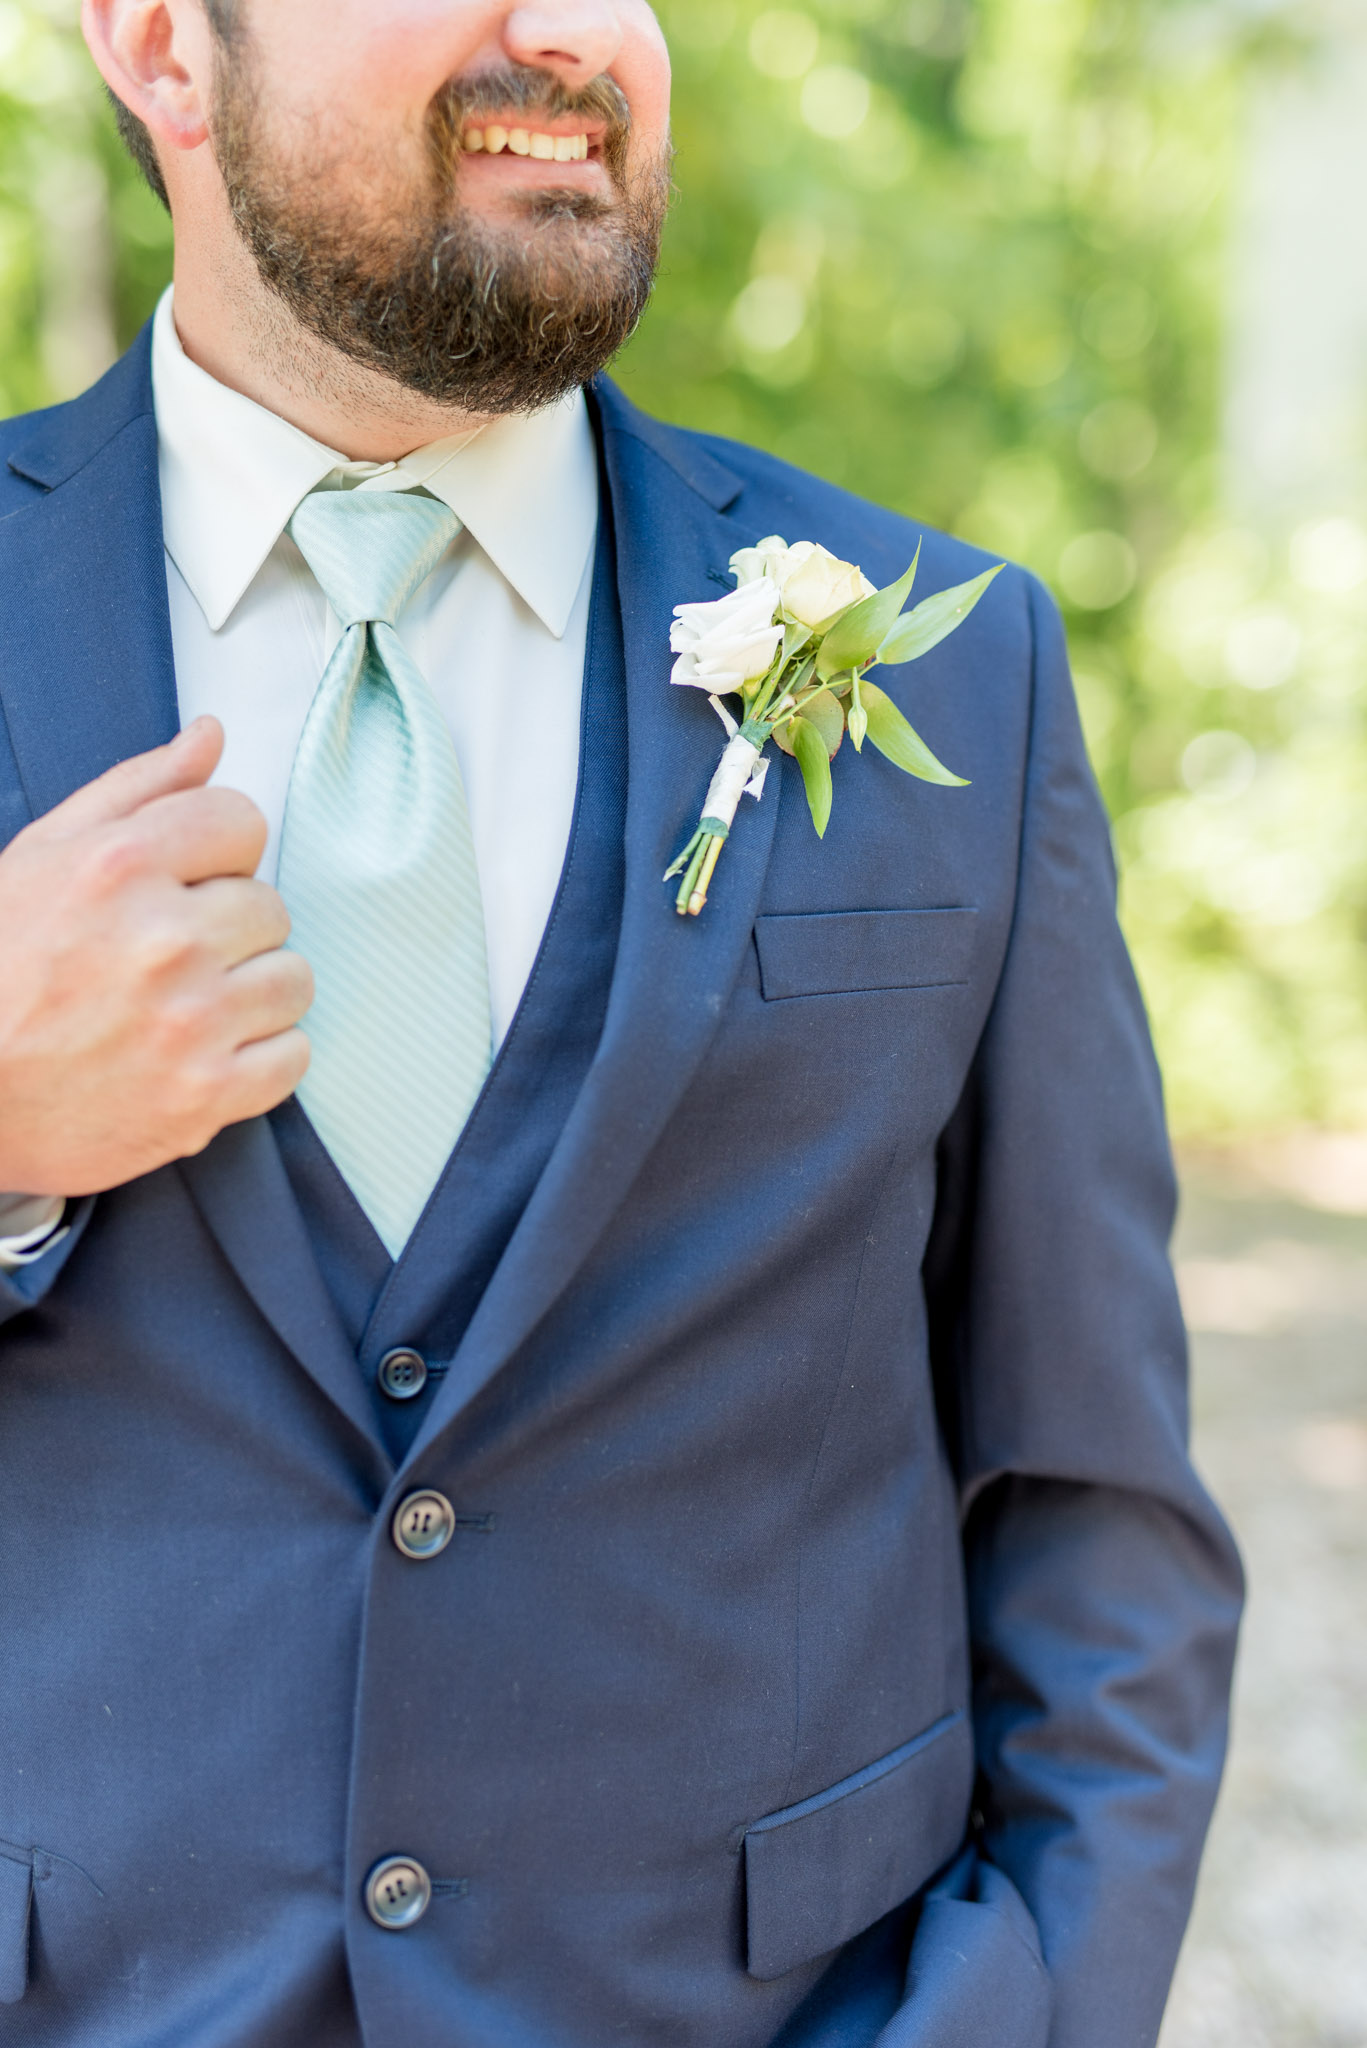 Groom's boutonniere pinned to jacket.